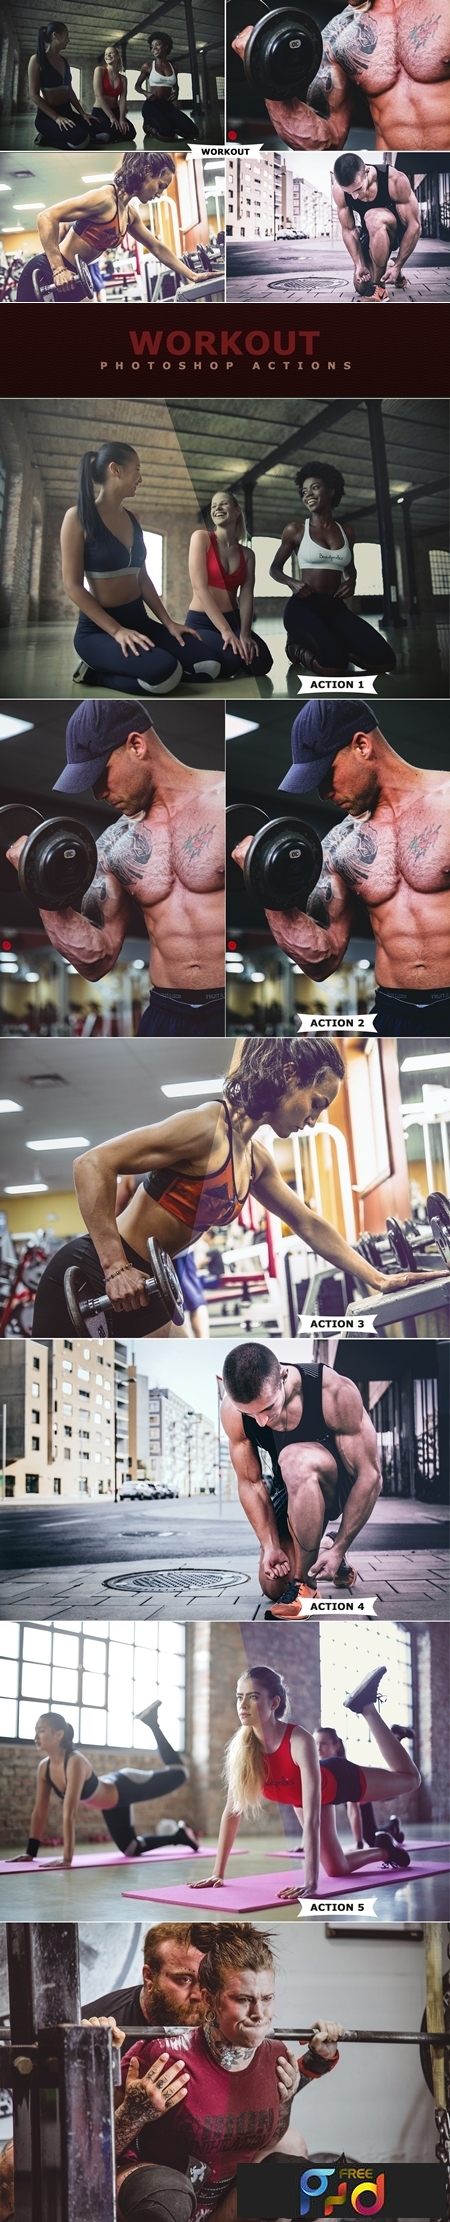 Workout Photoshop Actions